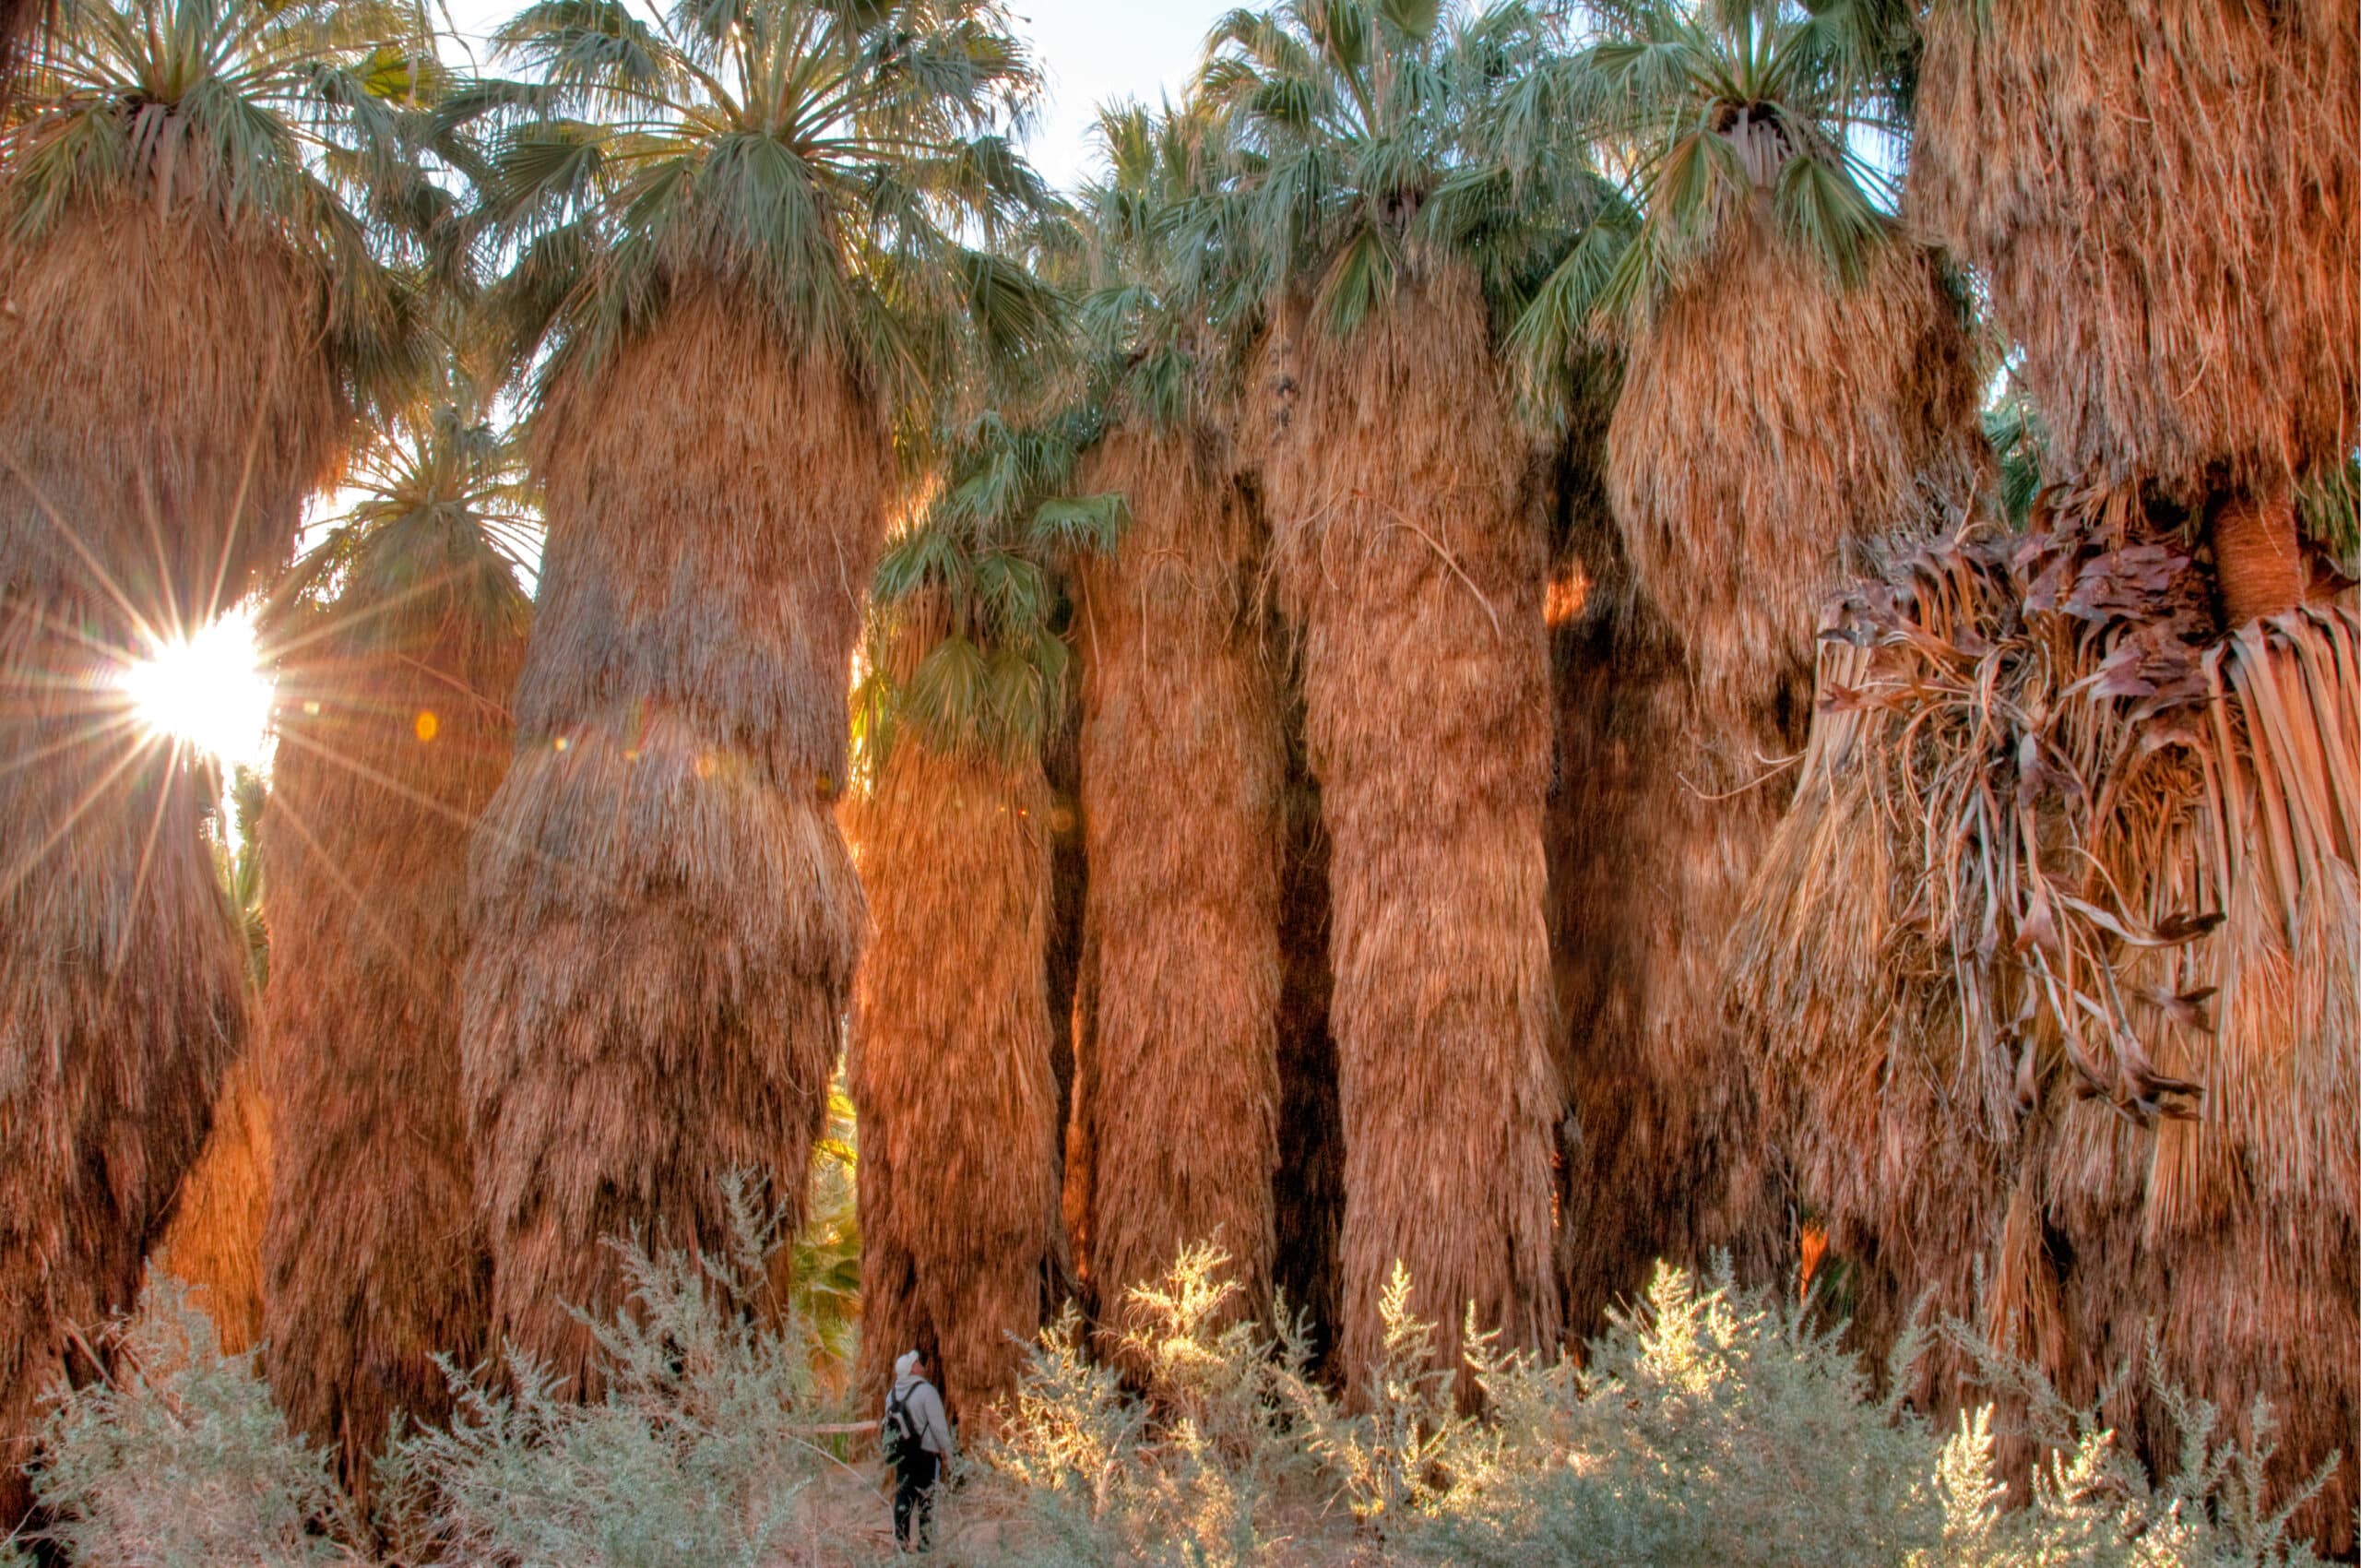 Man stands beneath giant palms in desert oasis